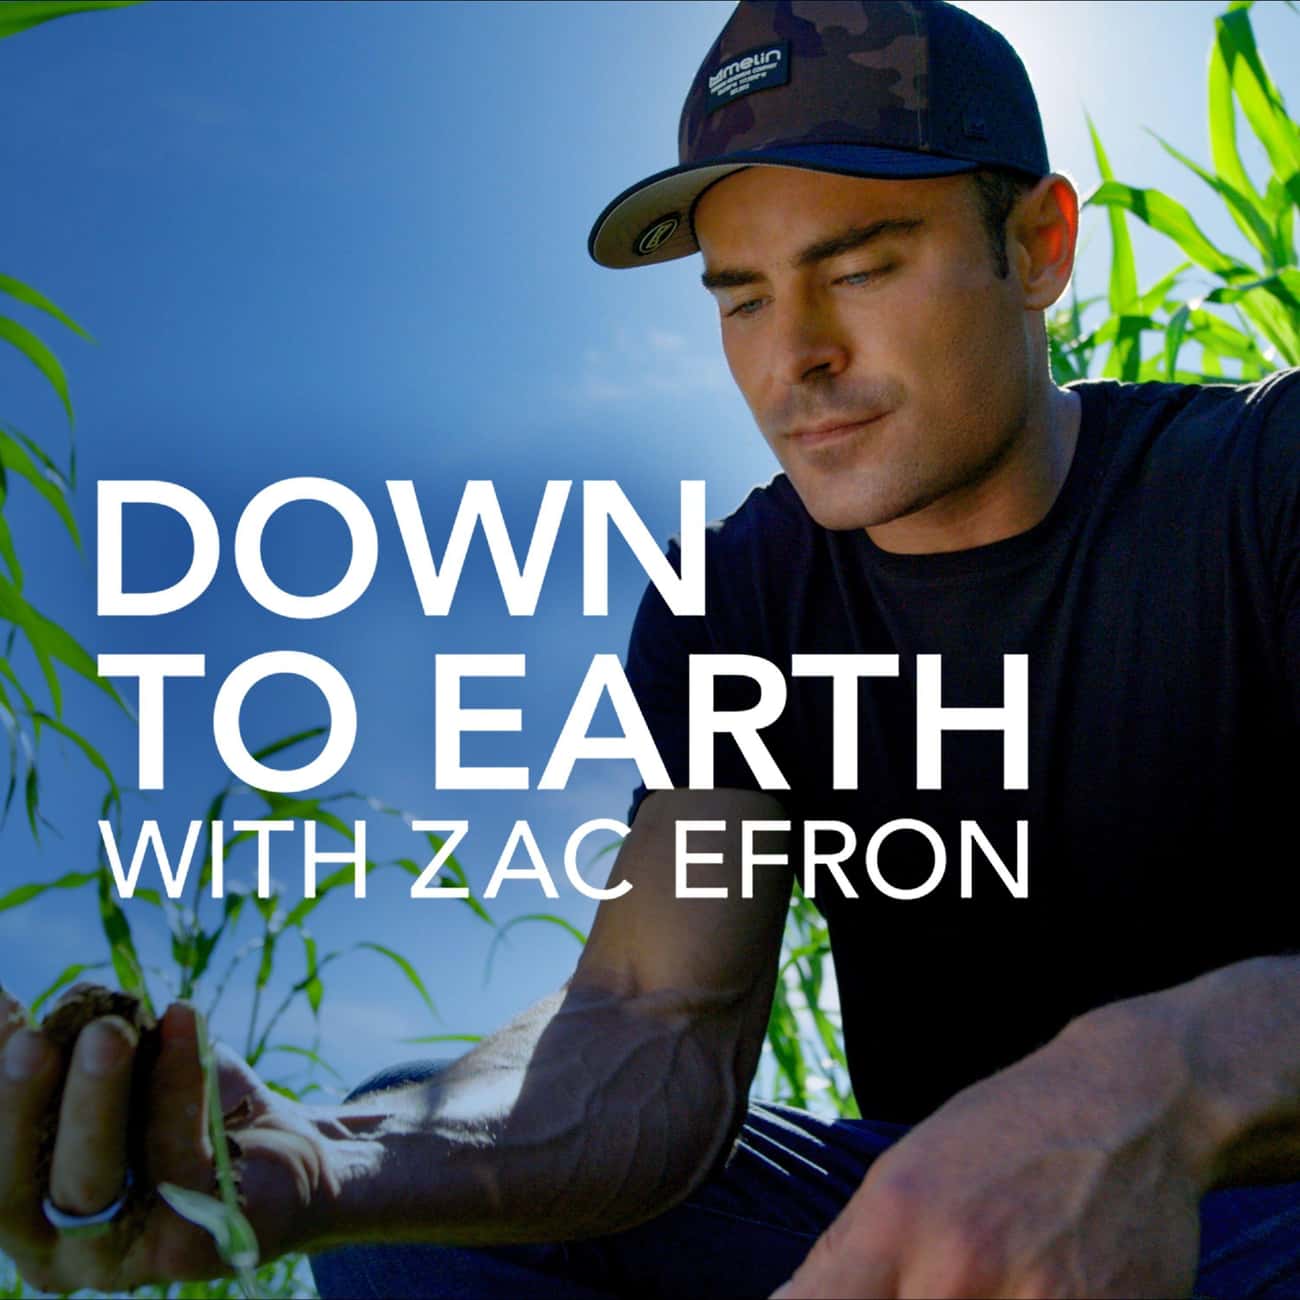 Down to Earth With Zac Efron: Down Under